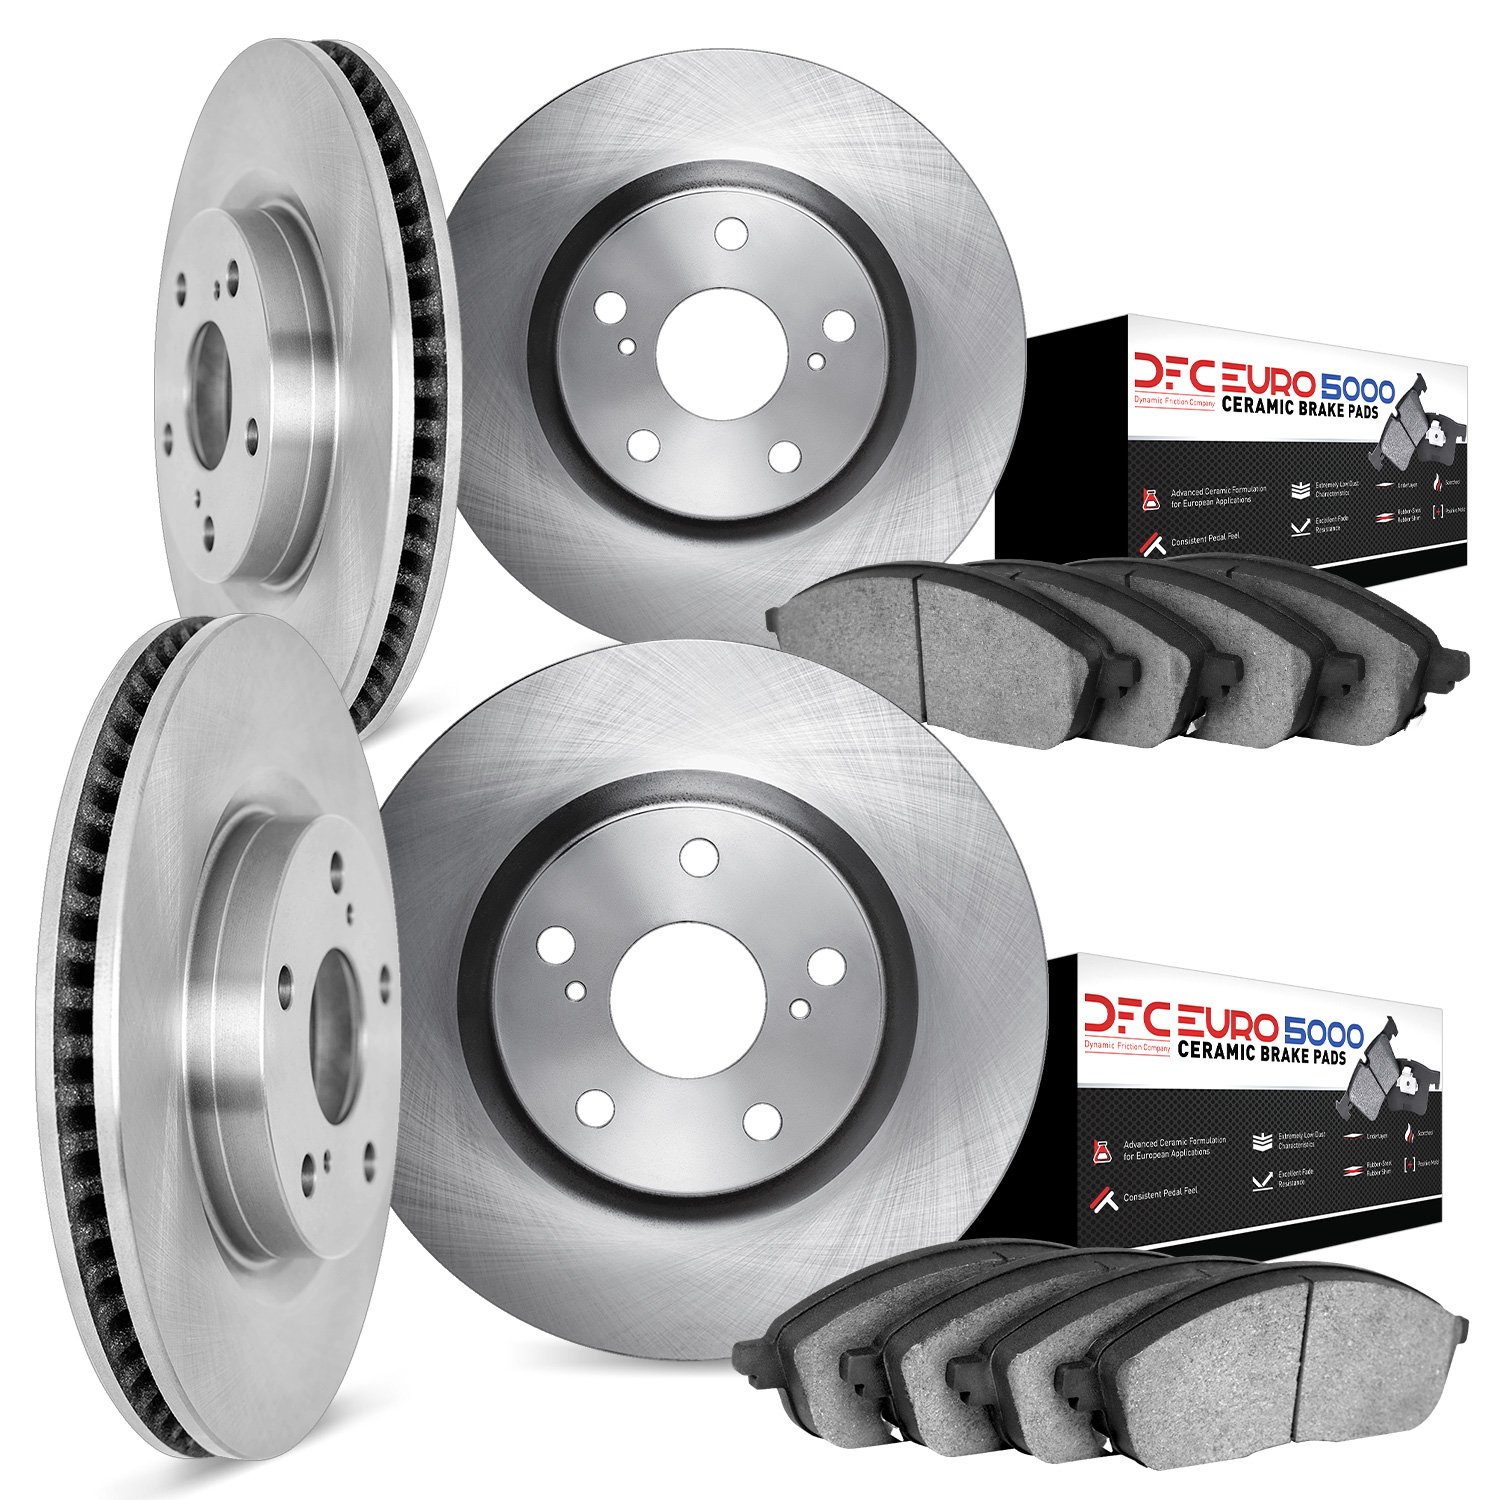 6604-11423 Brake Rotors w/5000 Euro Ceramic Brake Pads, 2008-2015 Volvo, Position: Front and Rear